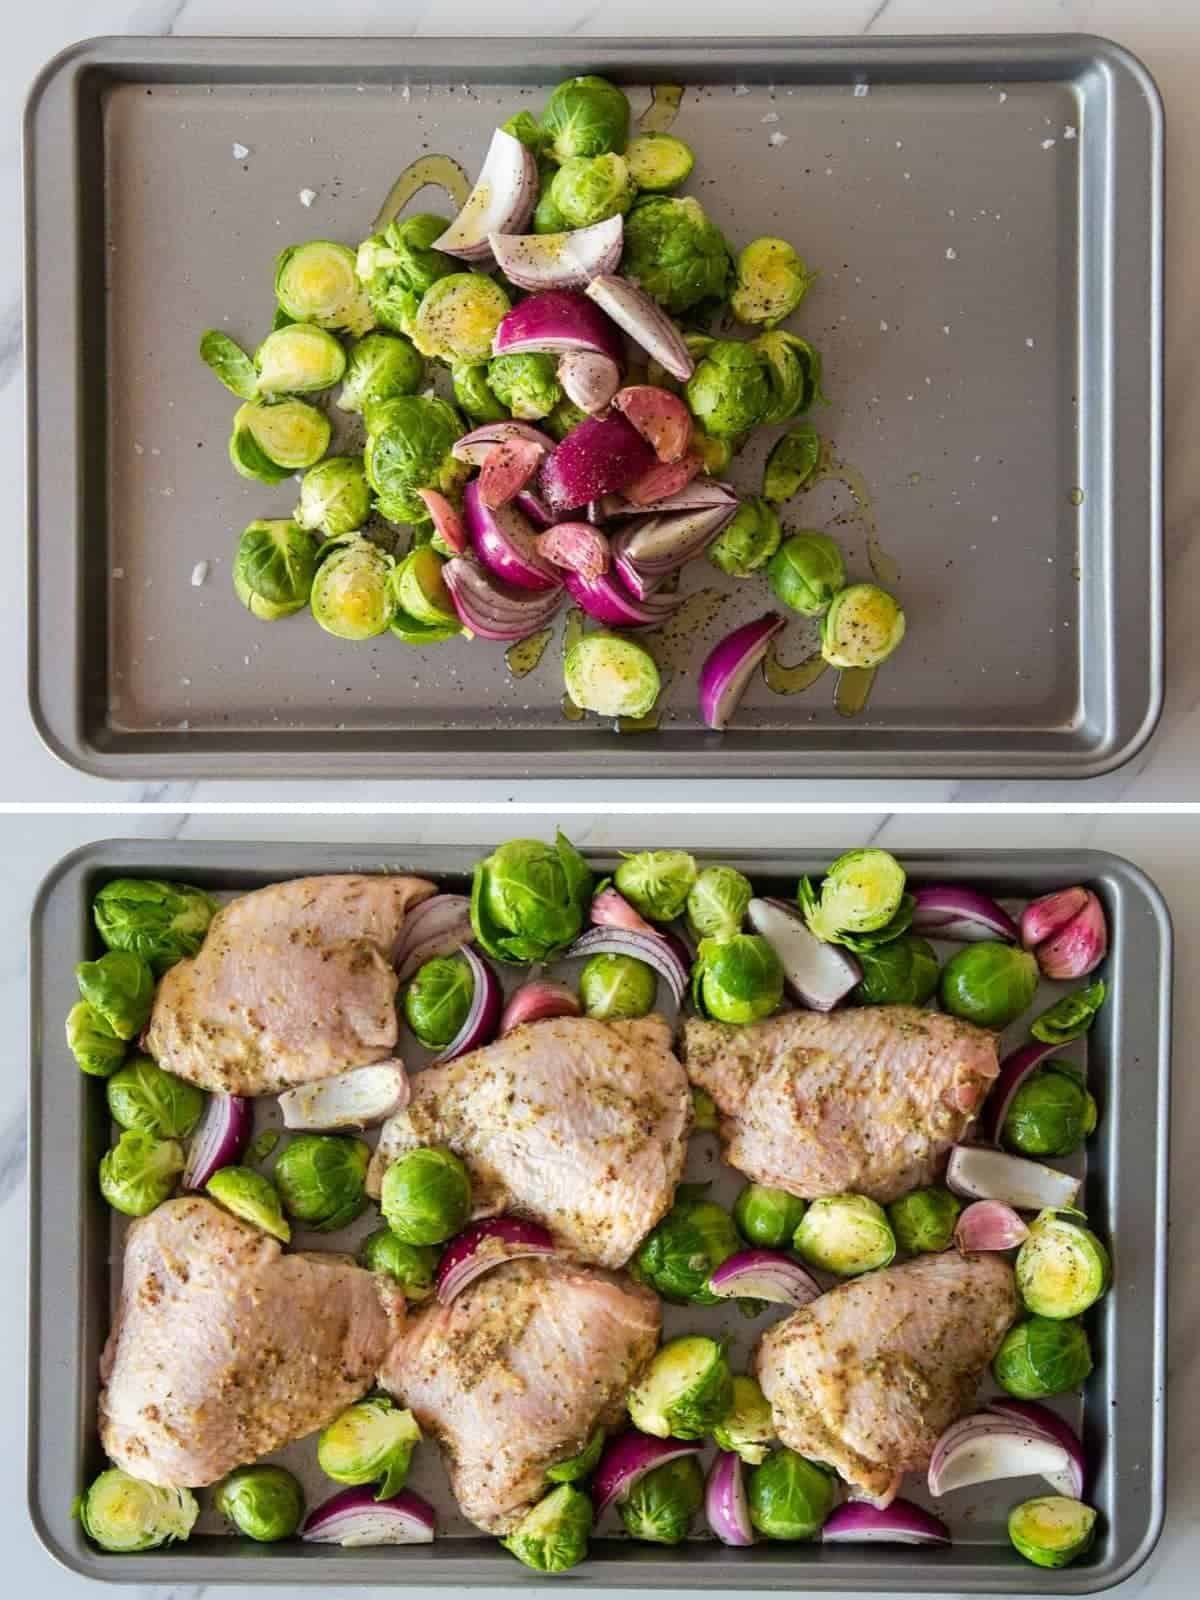 Steps how to add the veggies and chicken thighs to the sheet pan before roasting